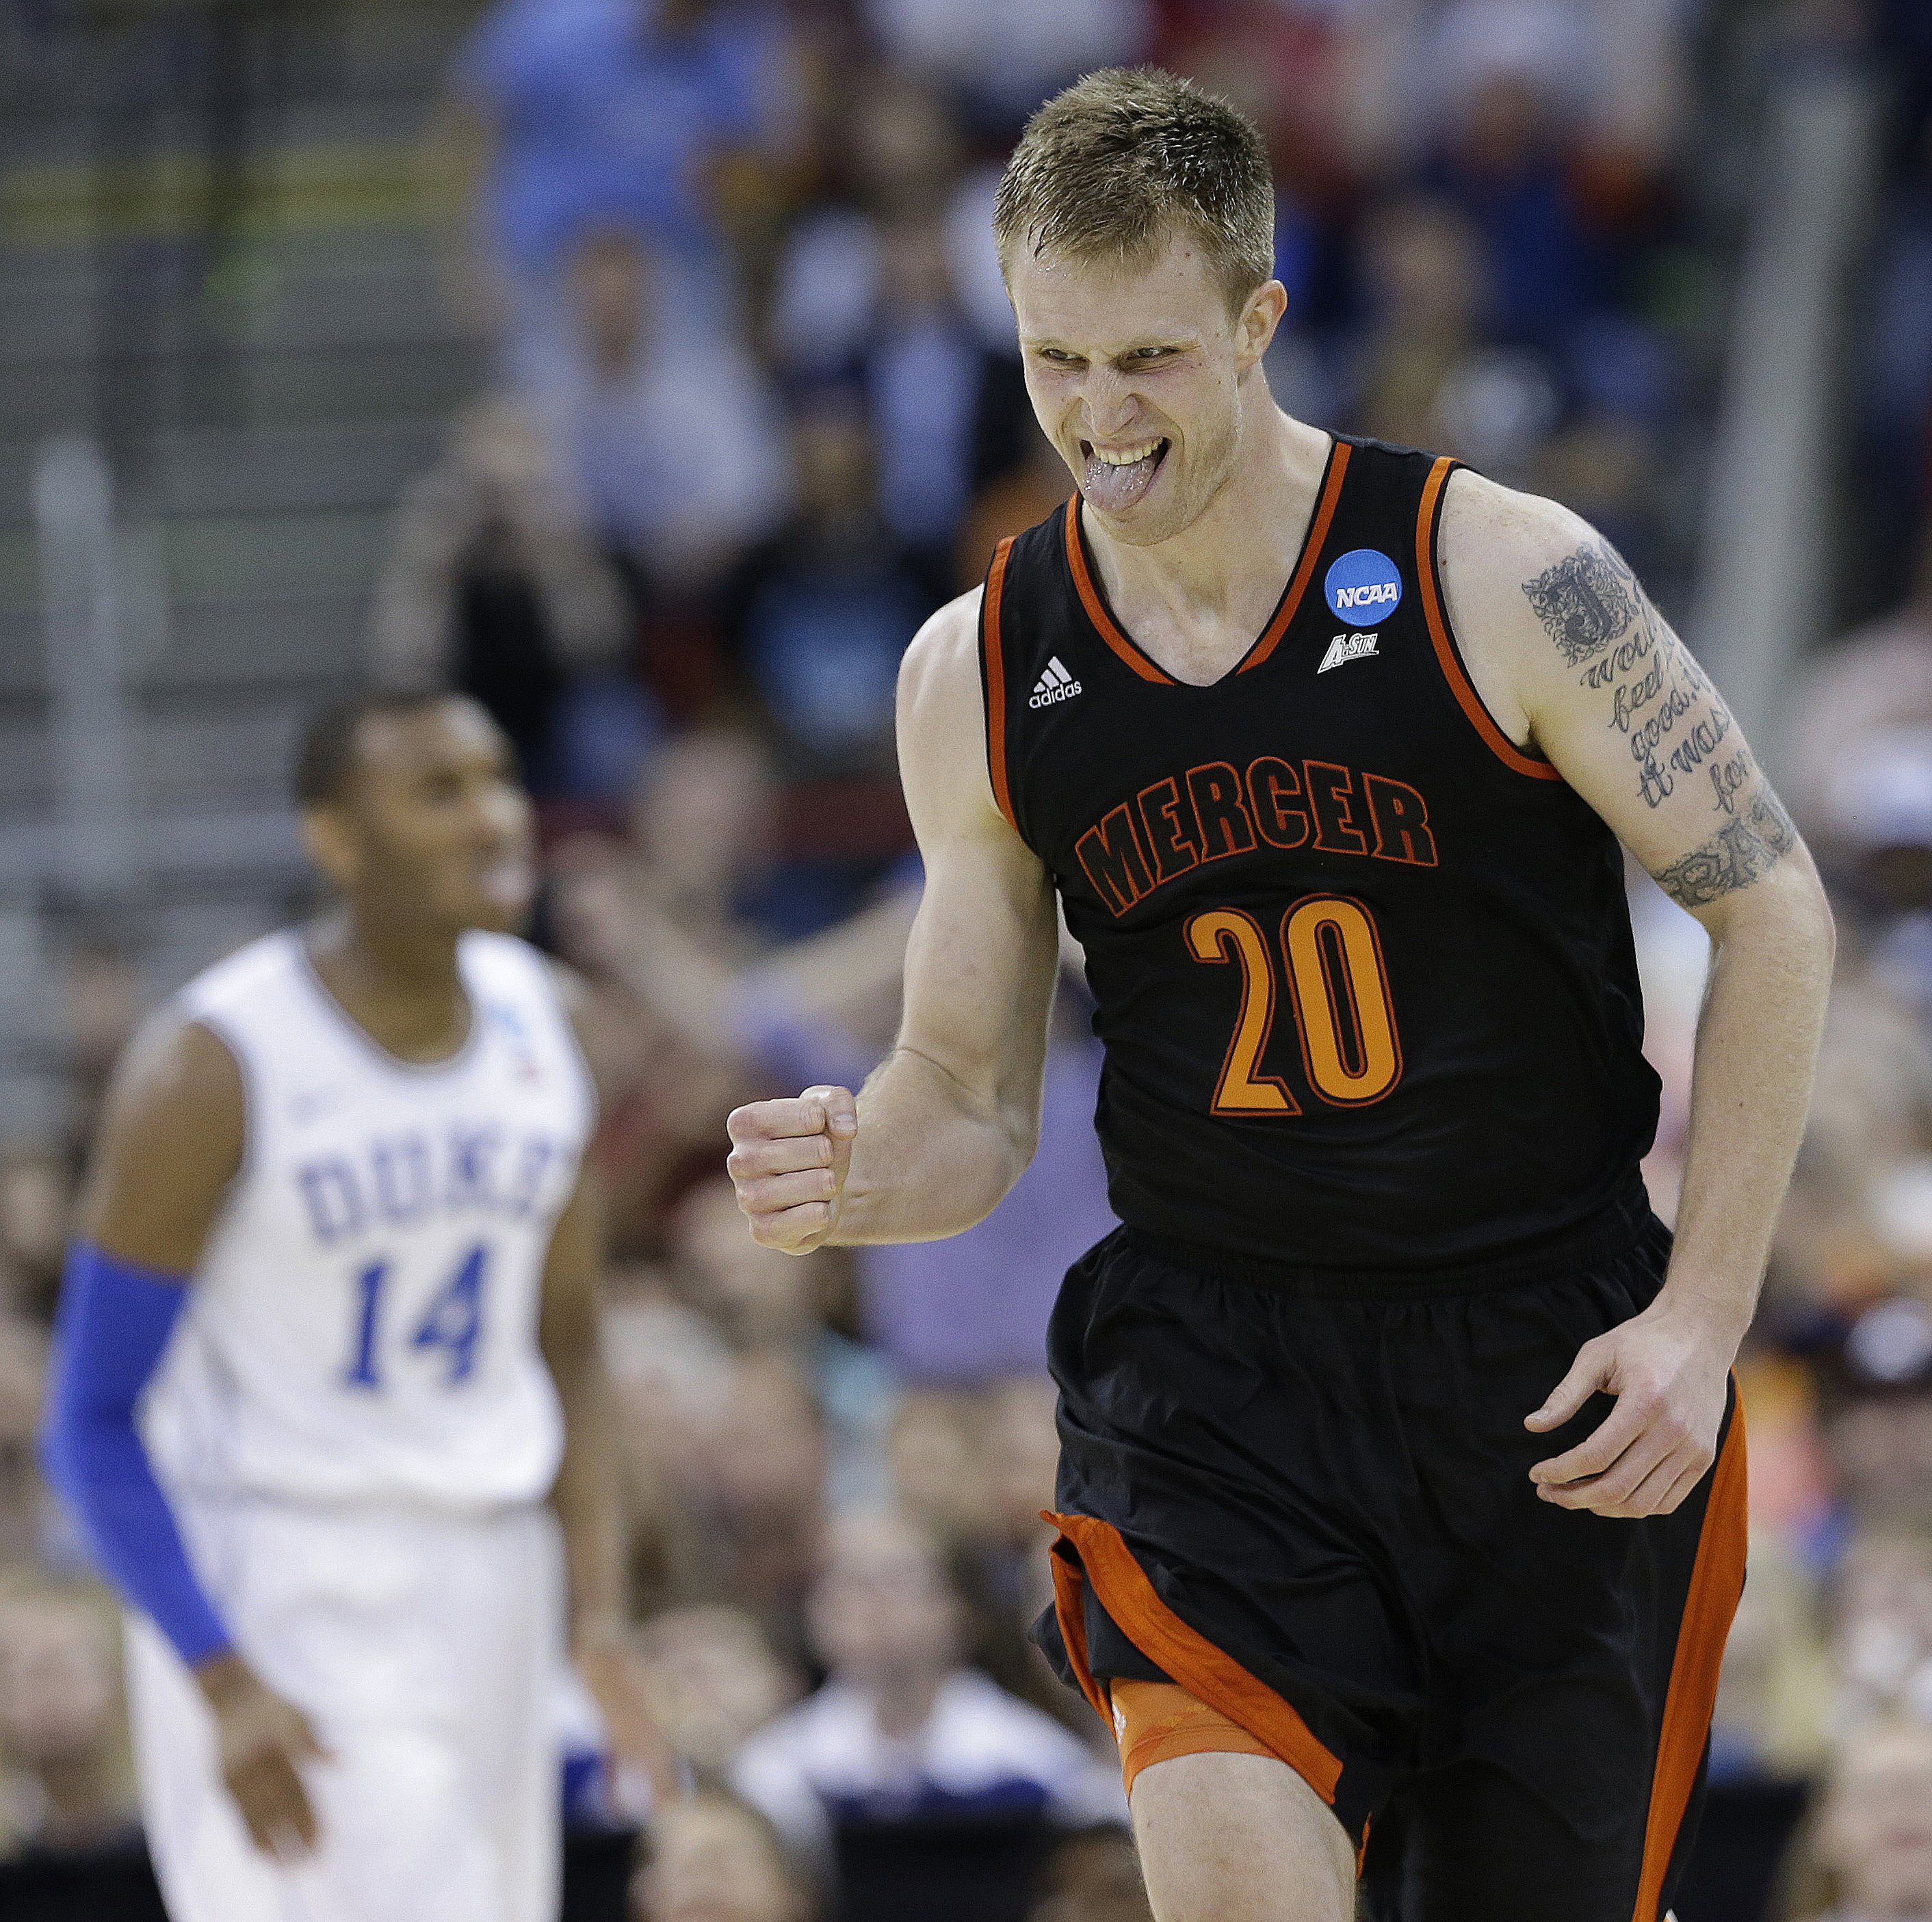 Mercer&#039;s upset over Duke just broke my bracket (and probably yours, too)